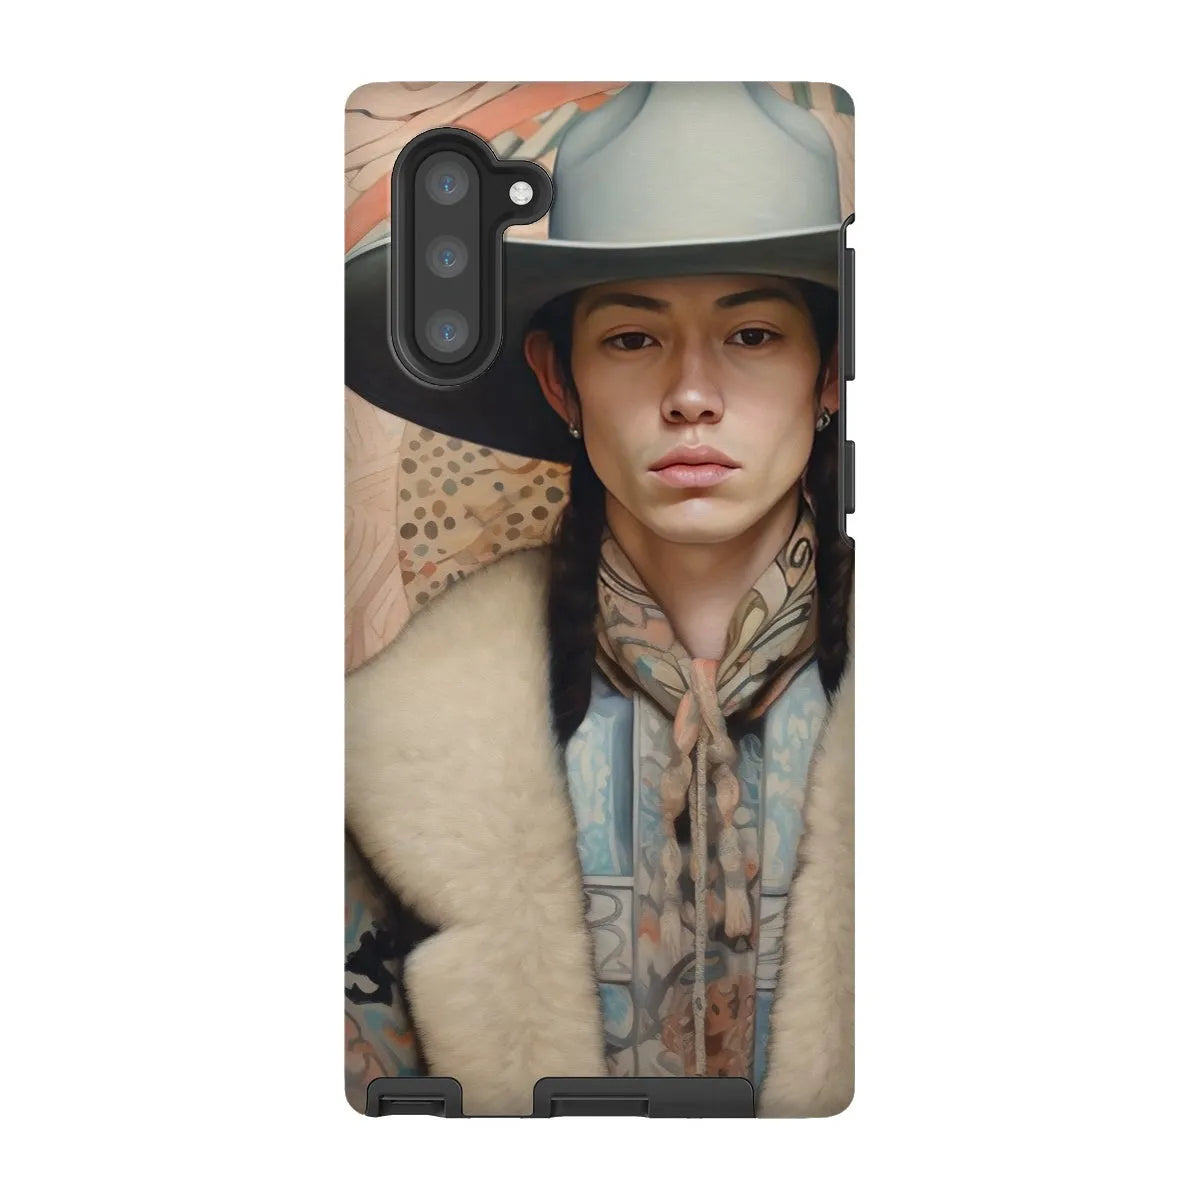 Jacy The Gay Cowboy - Dandy Gay Aesthetic Art Phone Case - Samsung Galaxy Note 10 / Matte - Mobile Phone Cases